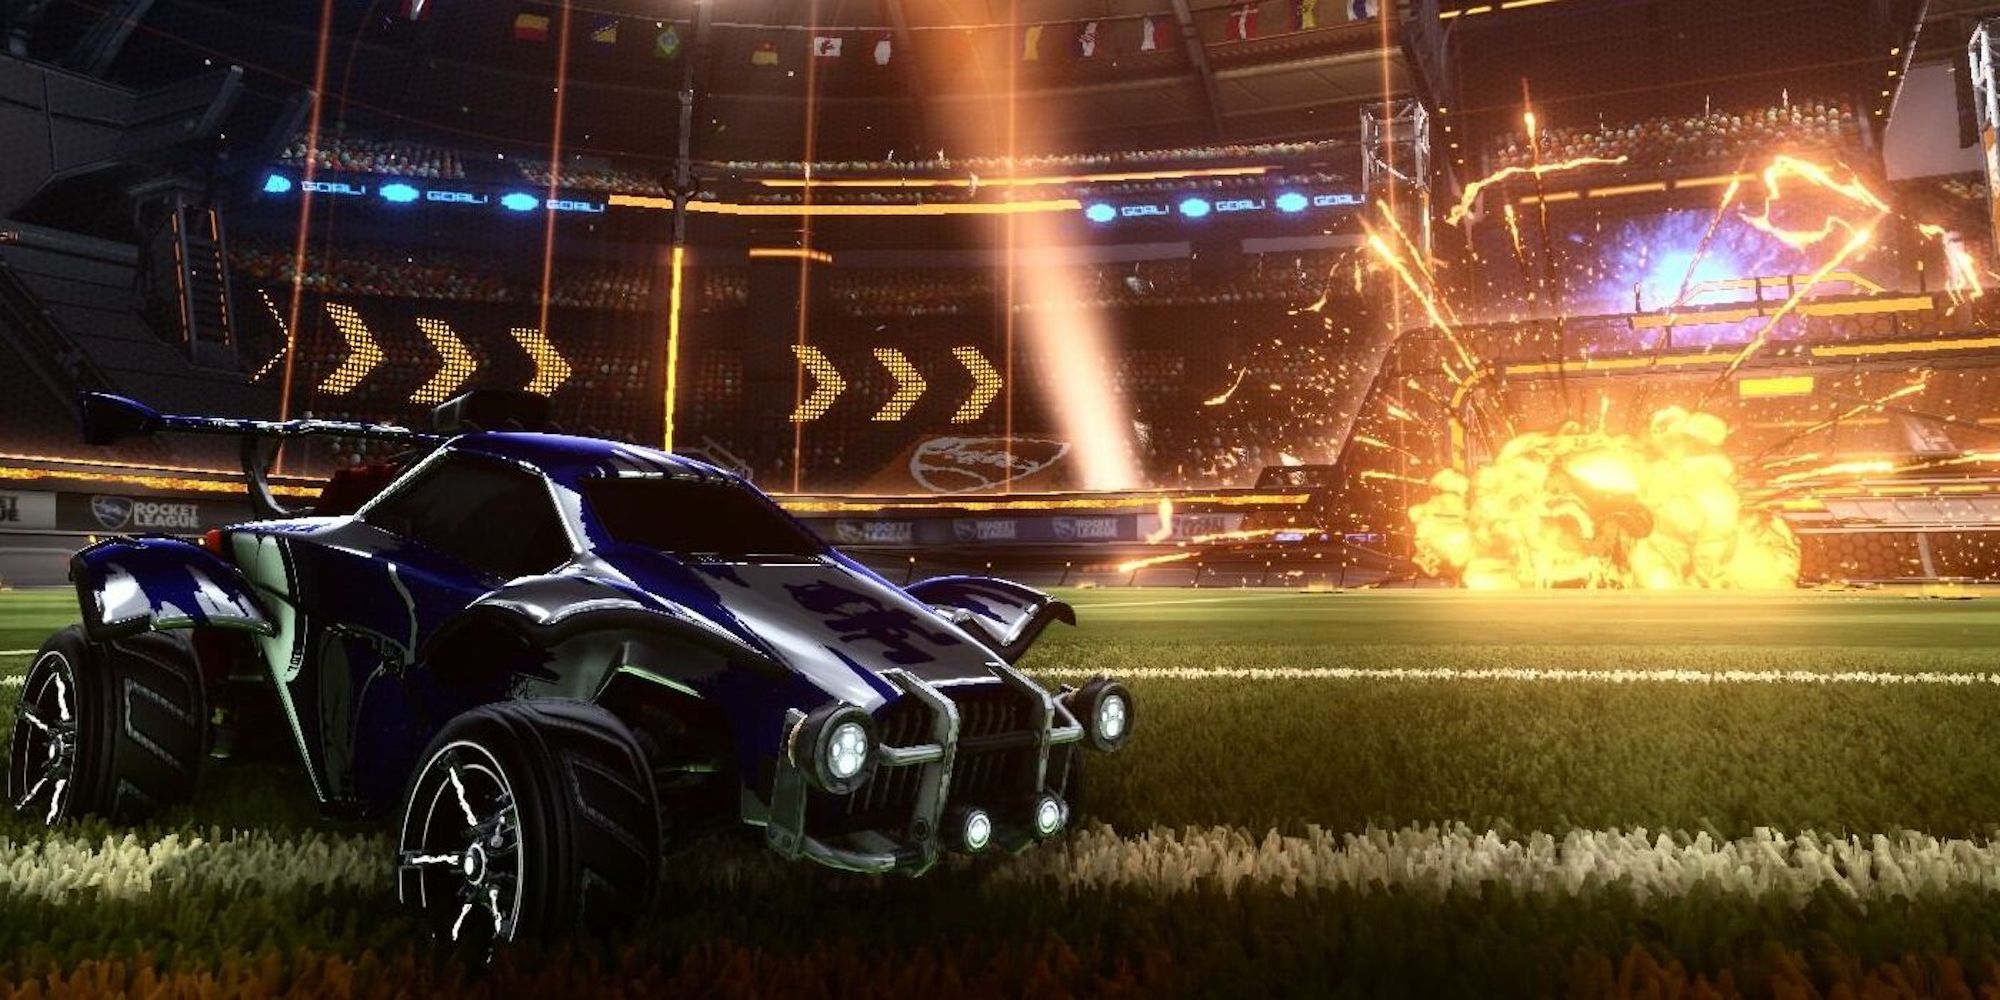 Promo art featuring cars from Rocket League